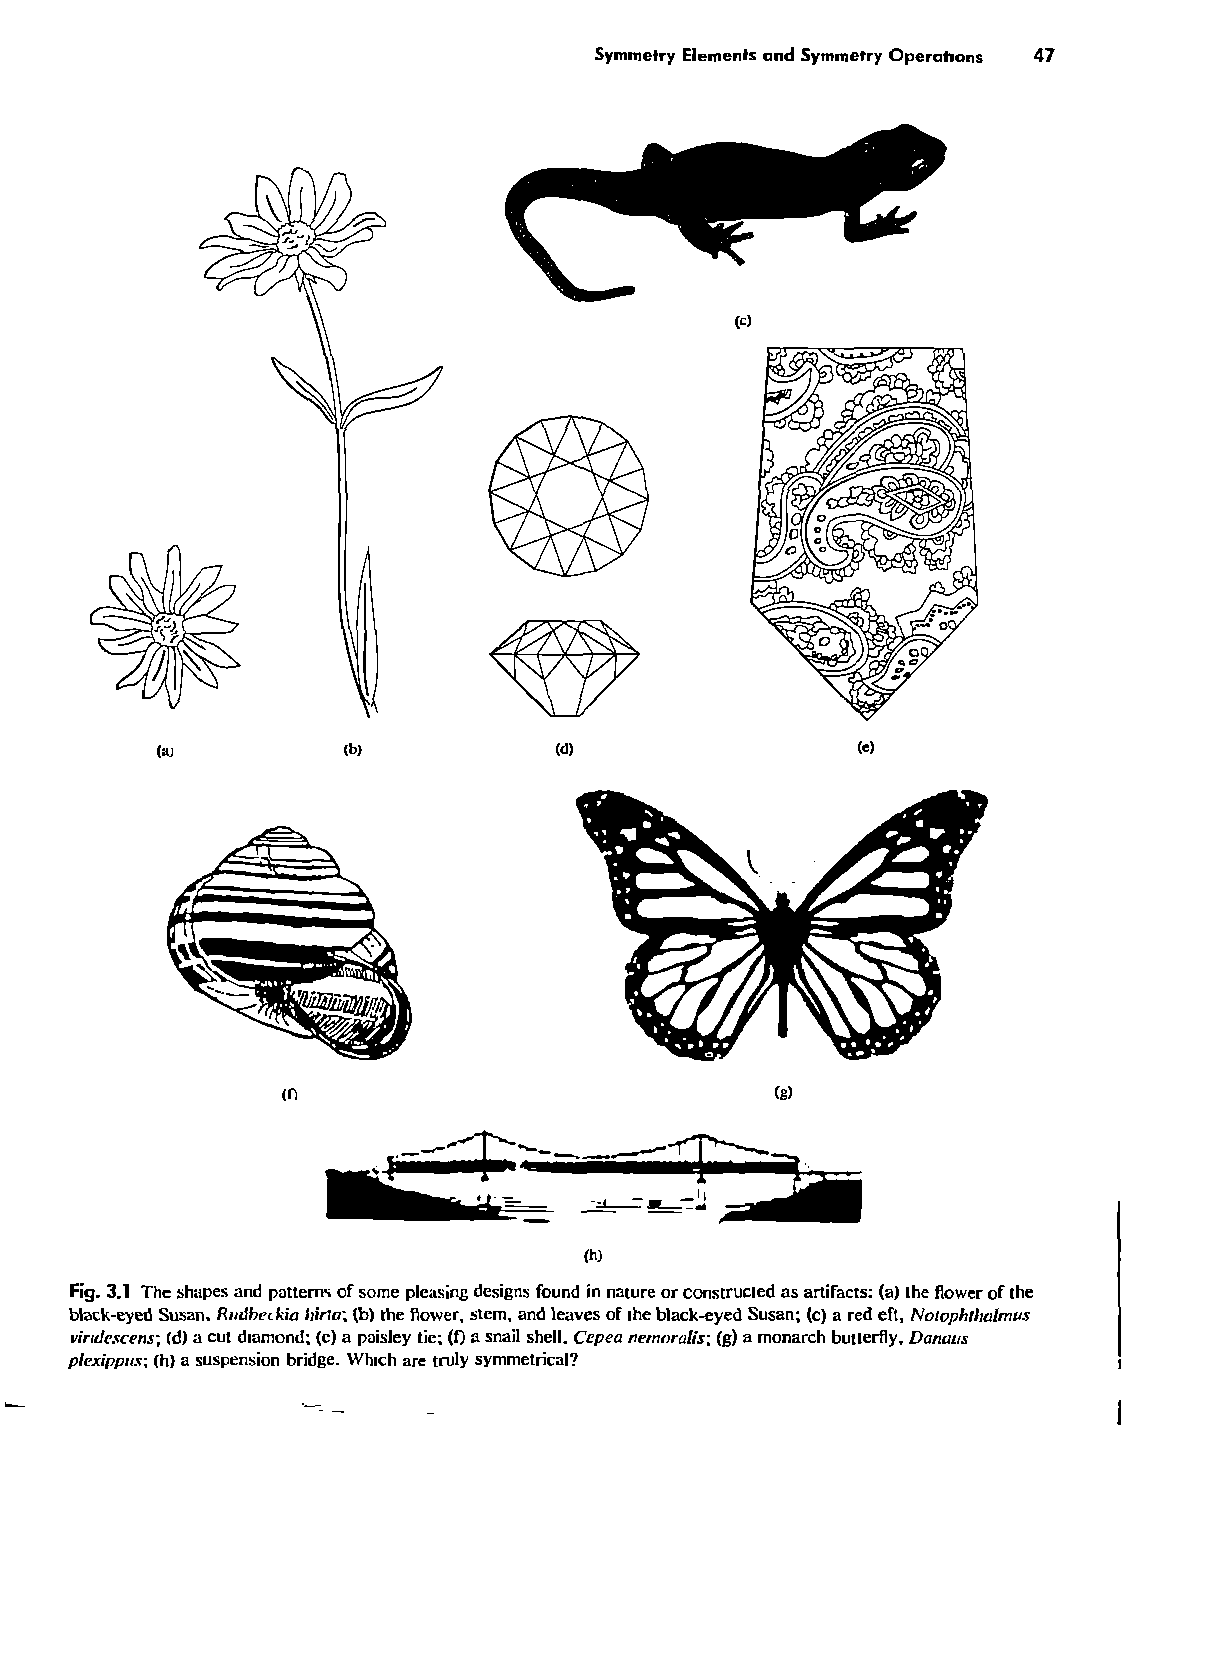 Fig. 3.1 The shapes and patterns of some pleasing designs found in nature or constructed as artifacts (a) the flower of the black-eyed Susan. RmJbetkia hirin, lb) the flower, stem, and leaves of the black-eyed Susan (c) a red eft, Notophtluilrrws vintlescens (d) a cut diamond (c) a paisley tie (f) a snail shell. Cepea ne/noralis (g) a monarch butterfly, Daniws plexippiix (h) a suspension bridge. Which are truly symmetrical ...